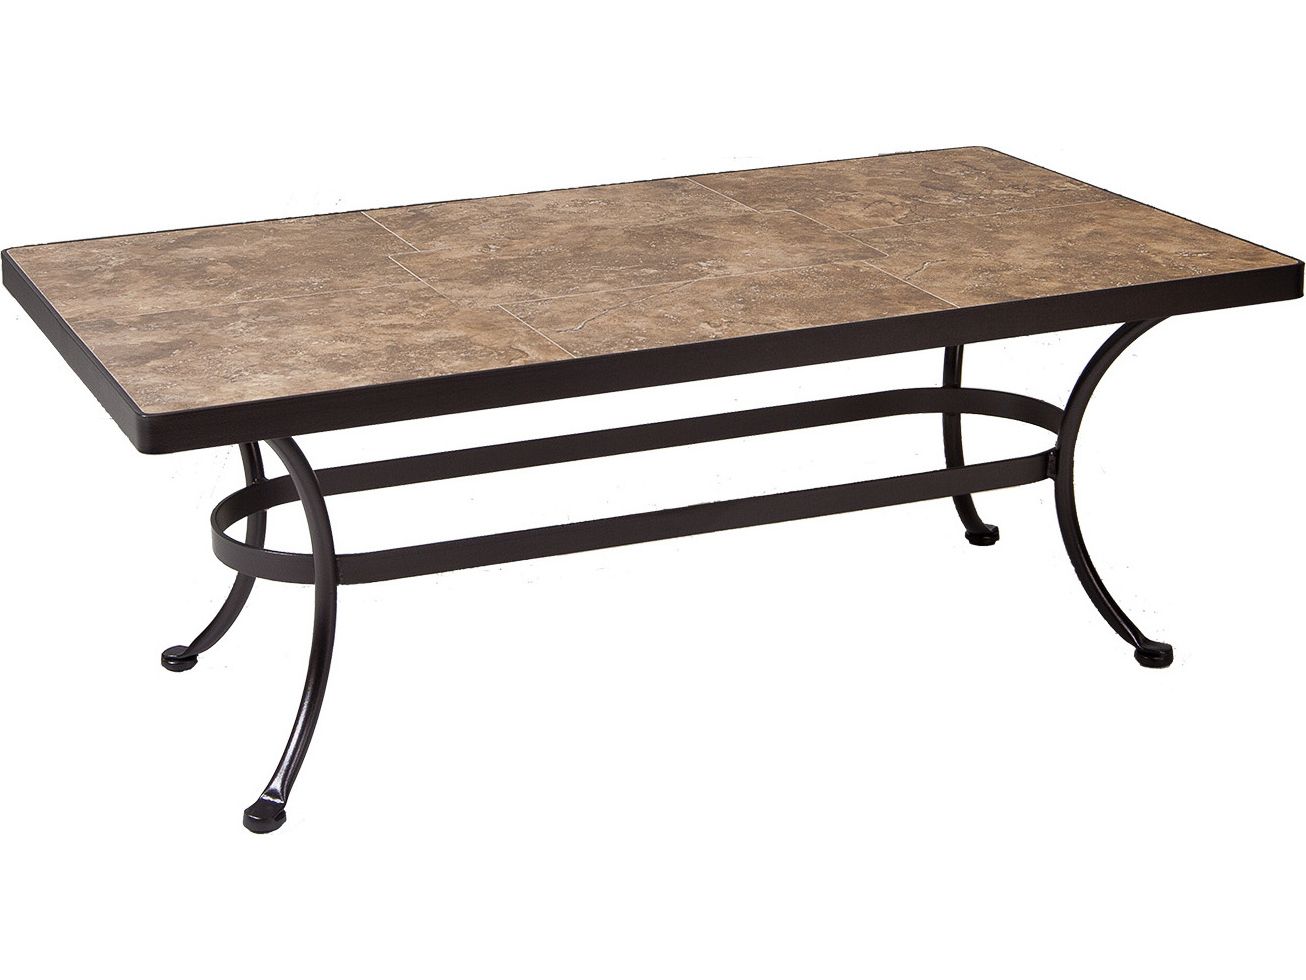 Rectangular Coffee Tables With Pedestal Bases Regarding Famous Ow Lee Wrought Iron Rectangular Coffee Table Base 43w X 20''d X 17.5h (Photo 7 of 15)